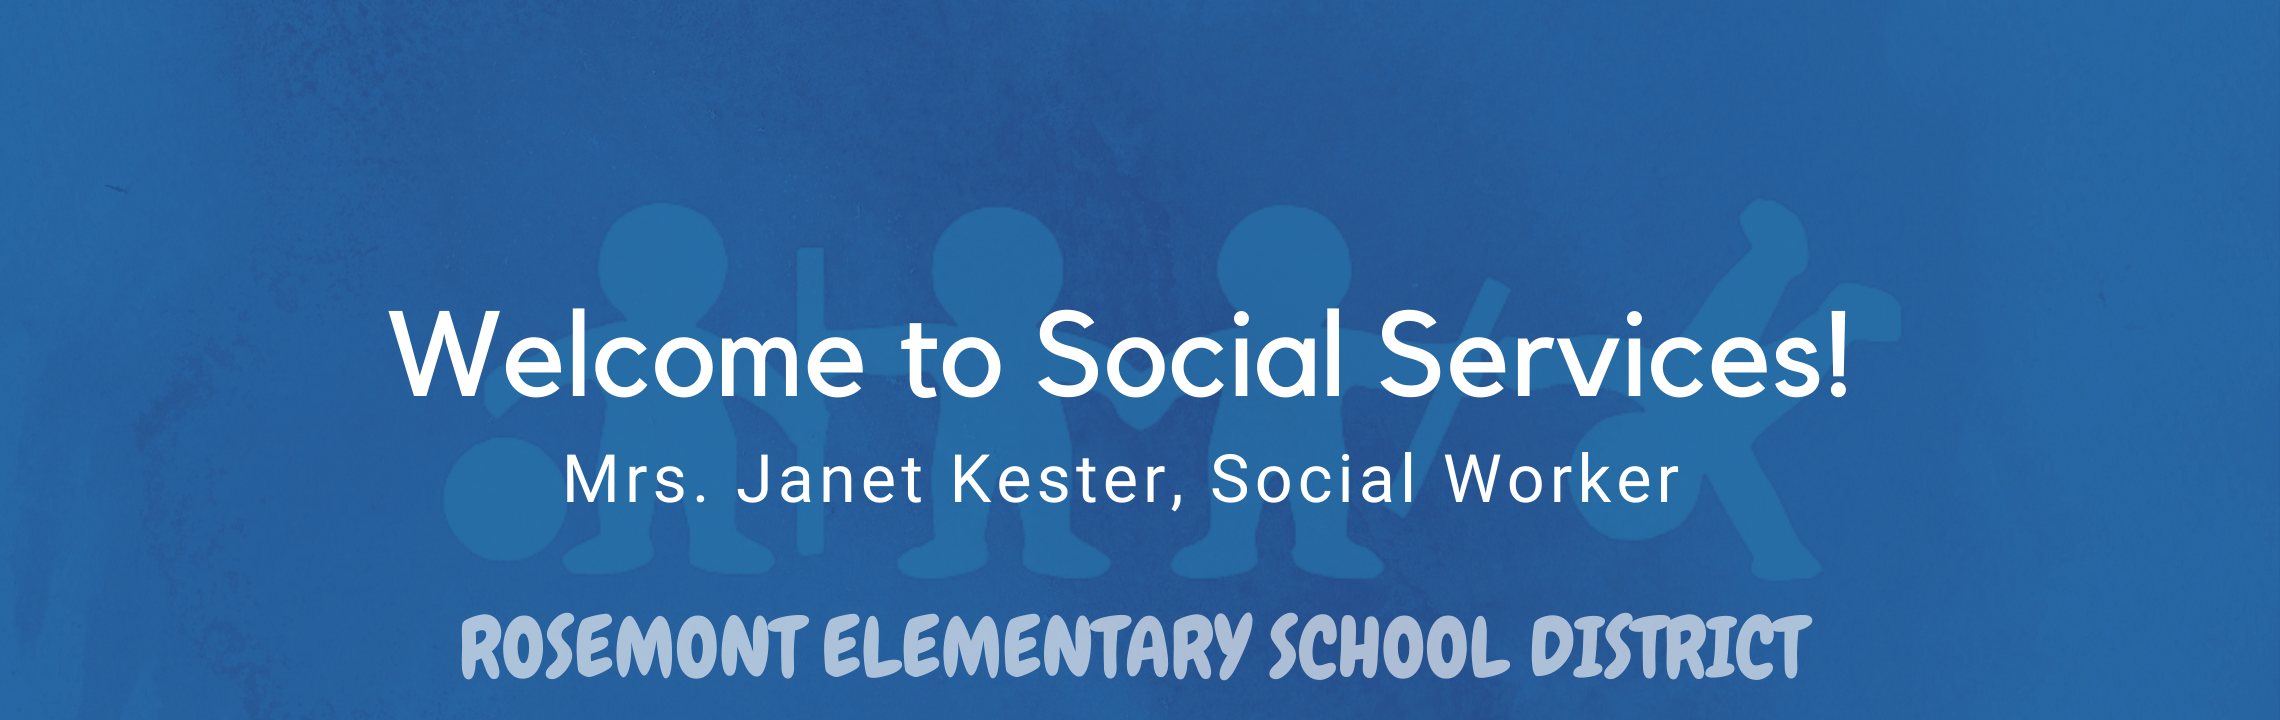 Welcome to Social Services! Mrs. Janet Kester, Social Worker,  Rosemont Elementary Schools 